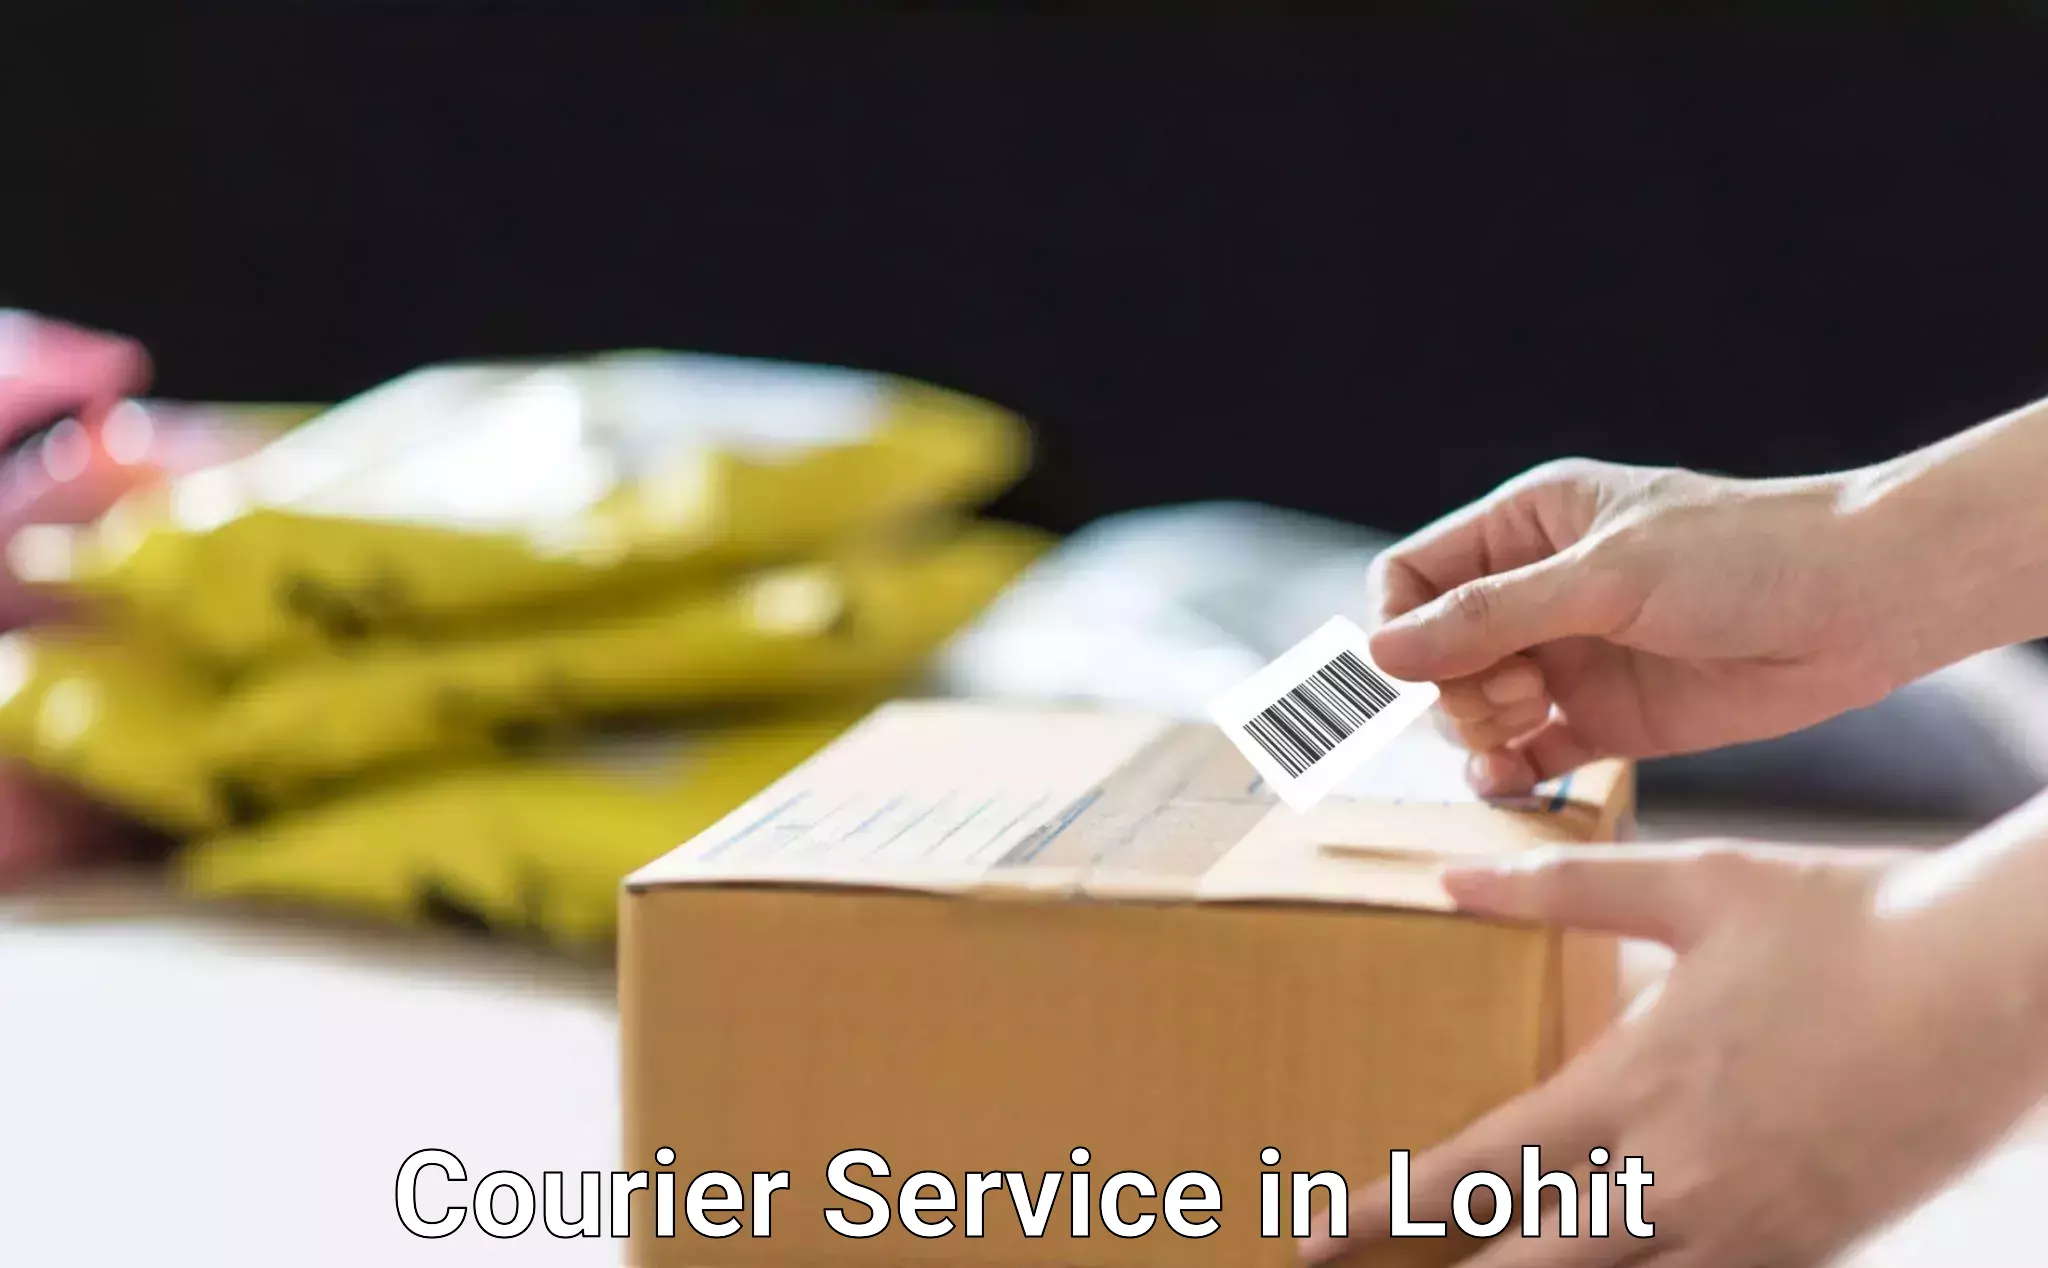 Parcel service for businesses in Lohit